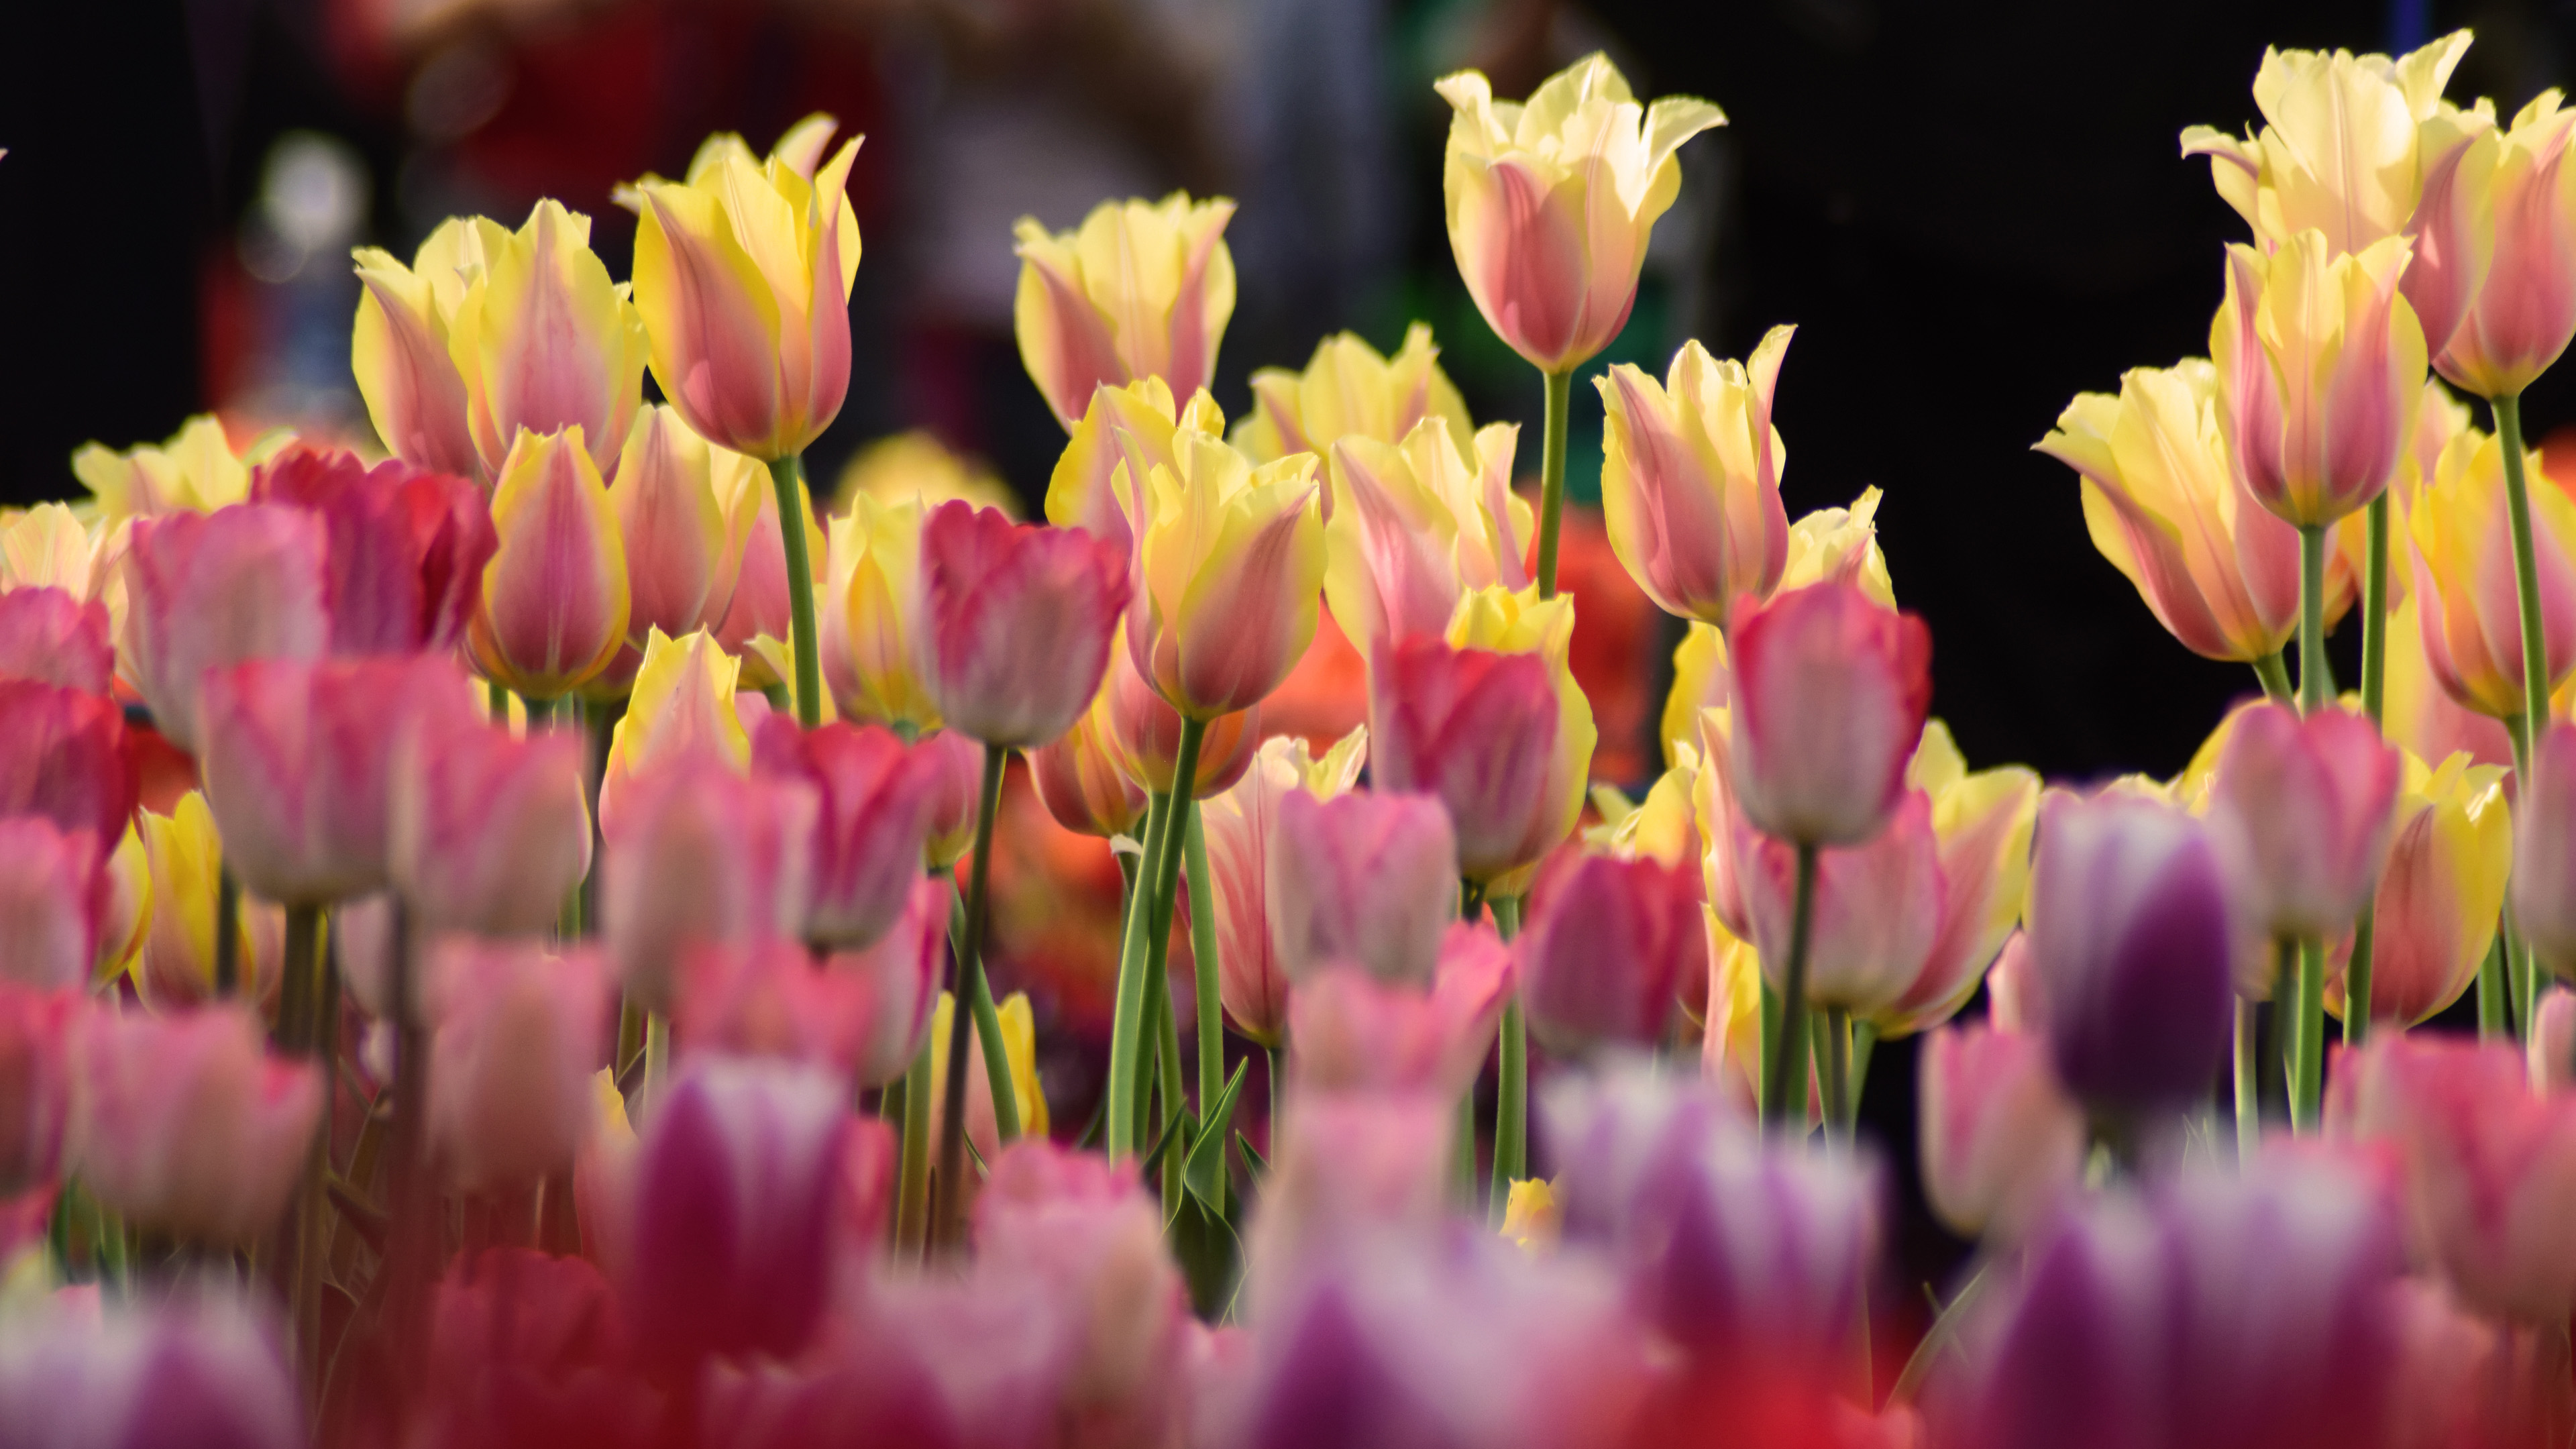 Tulips Flowers Two Colors Bright Pink With Light Yellow Color Wallpaper